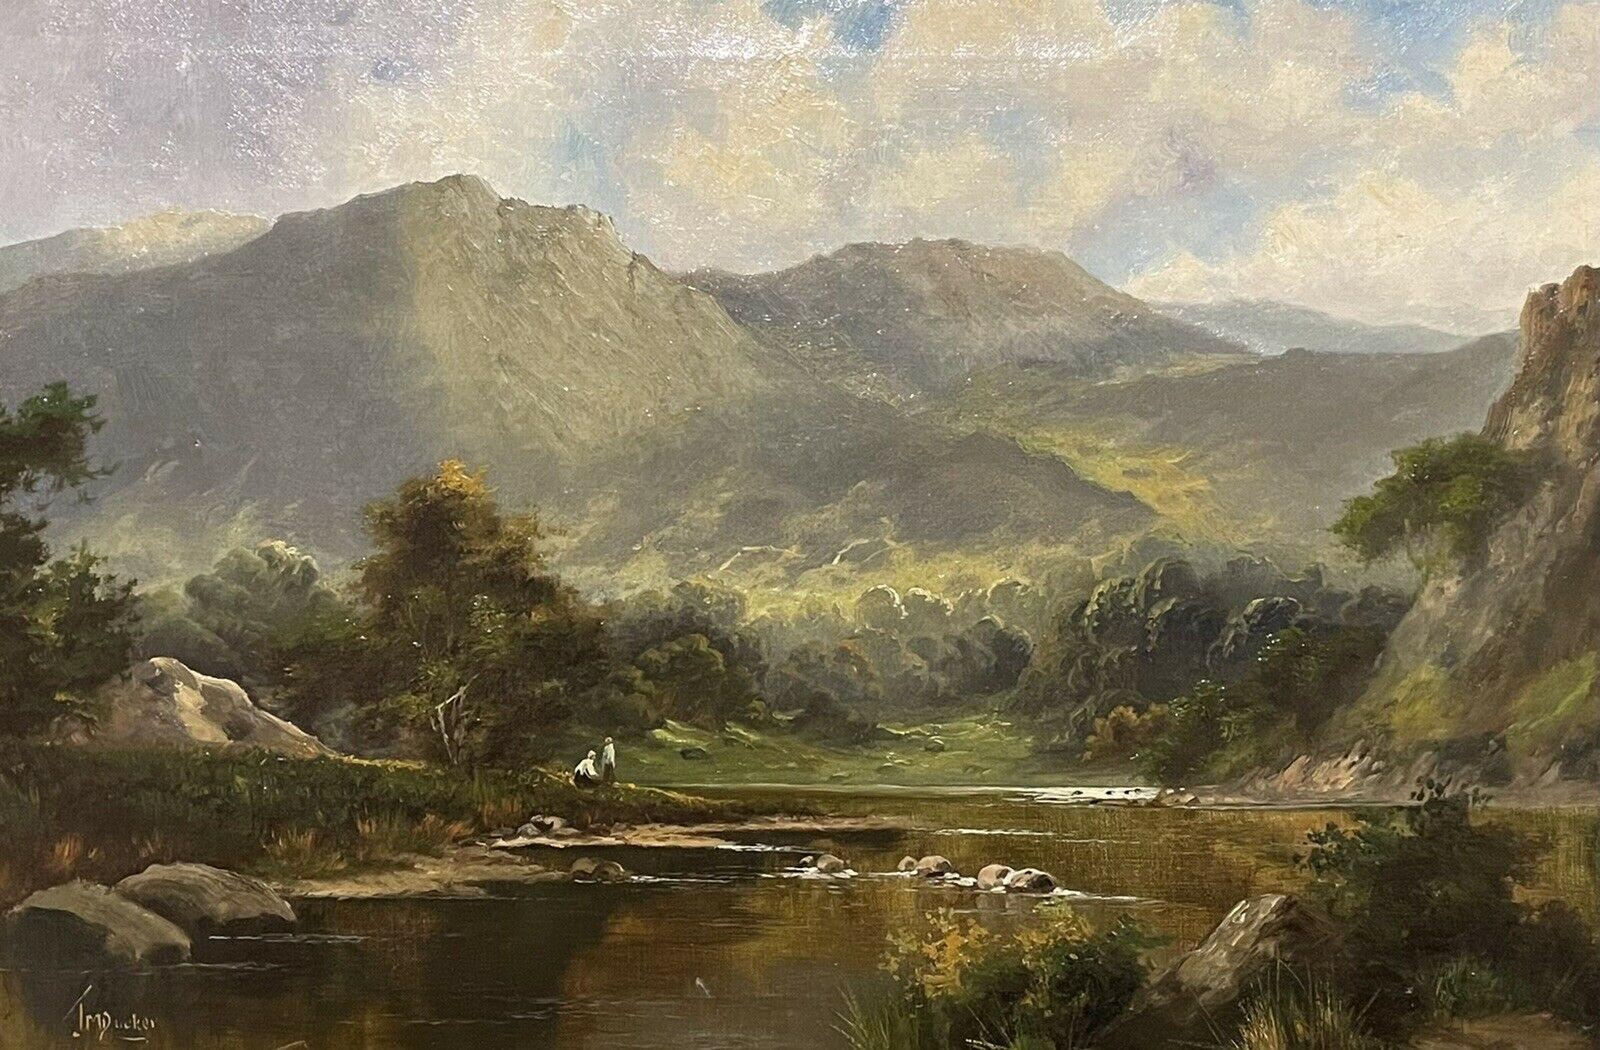 FINE ANTIQUE SCOTTISH HIGHLANDS OIL PAINTING - FIGURES BY MOUNTAINOUS LOCH SCENE - Painting by Jack M. Ducker